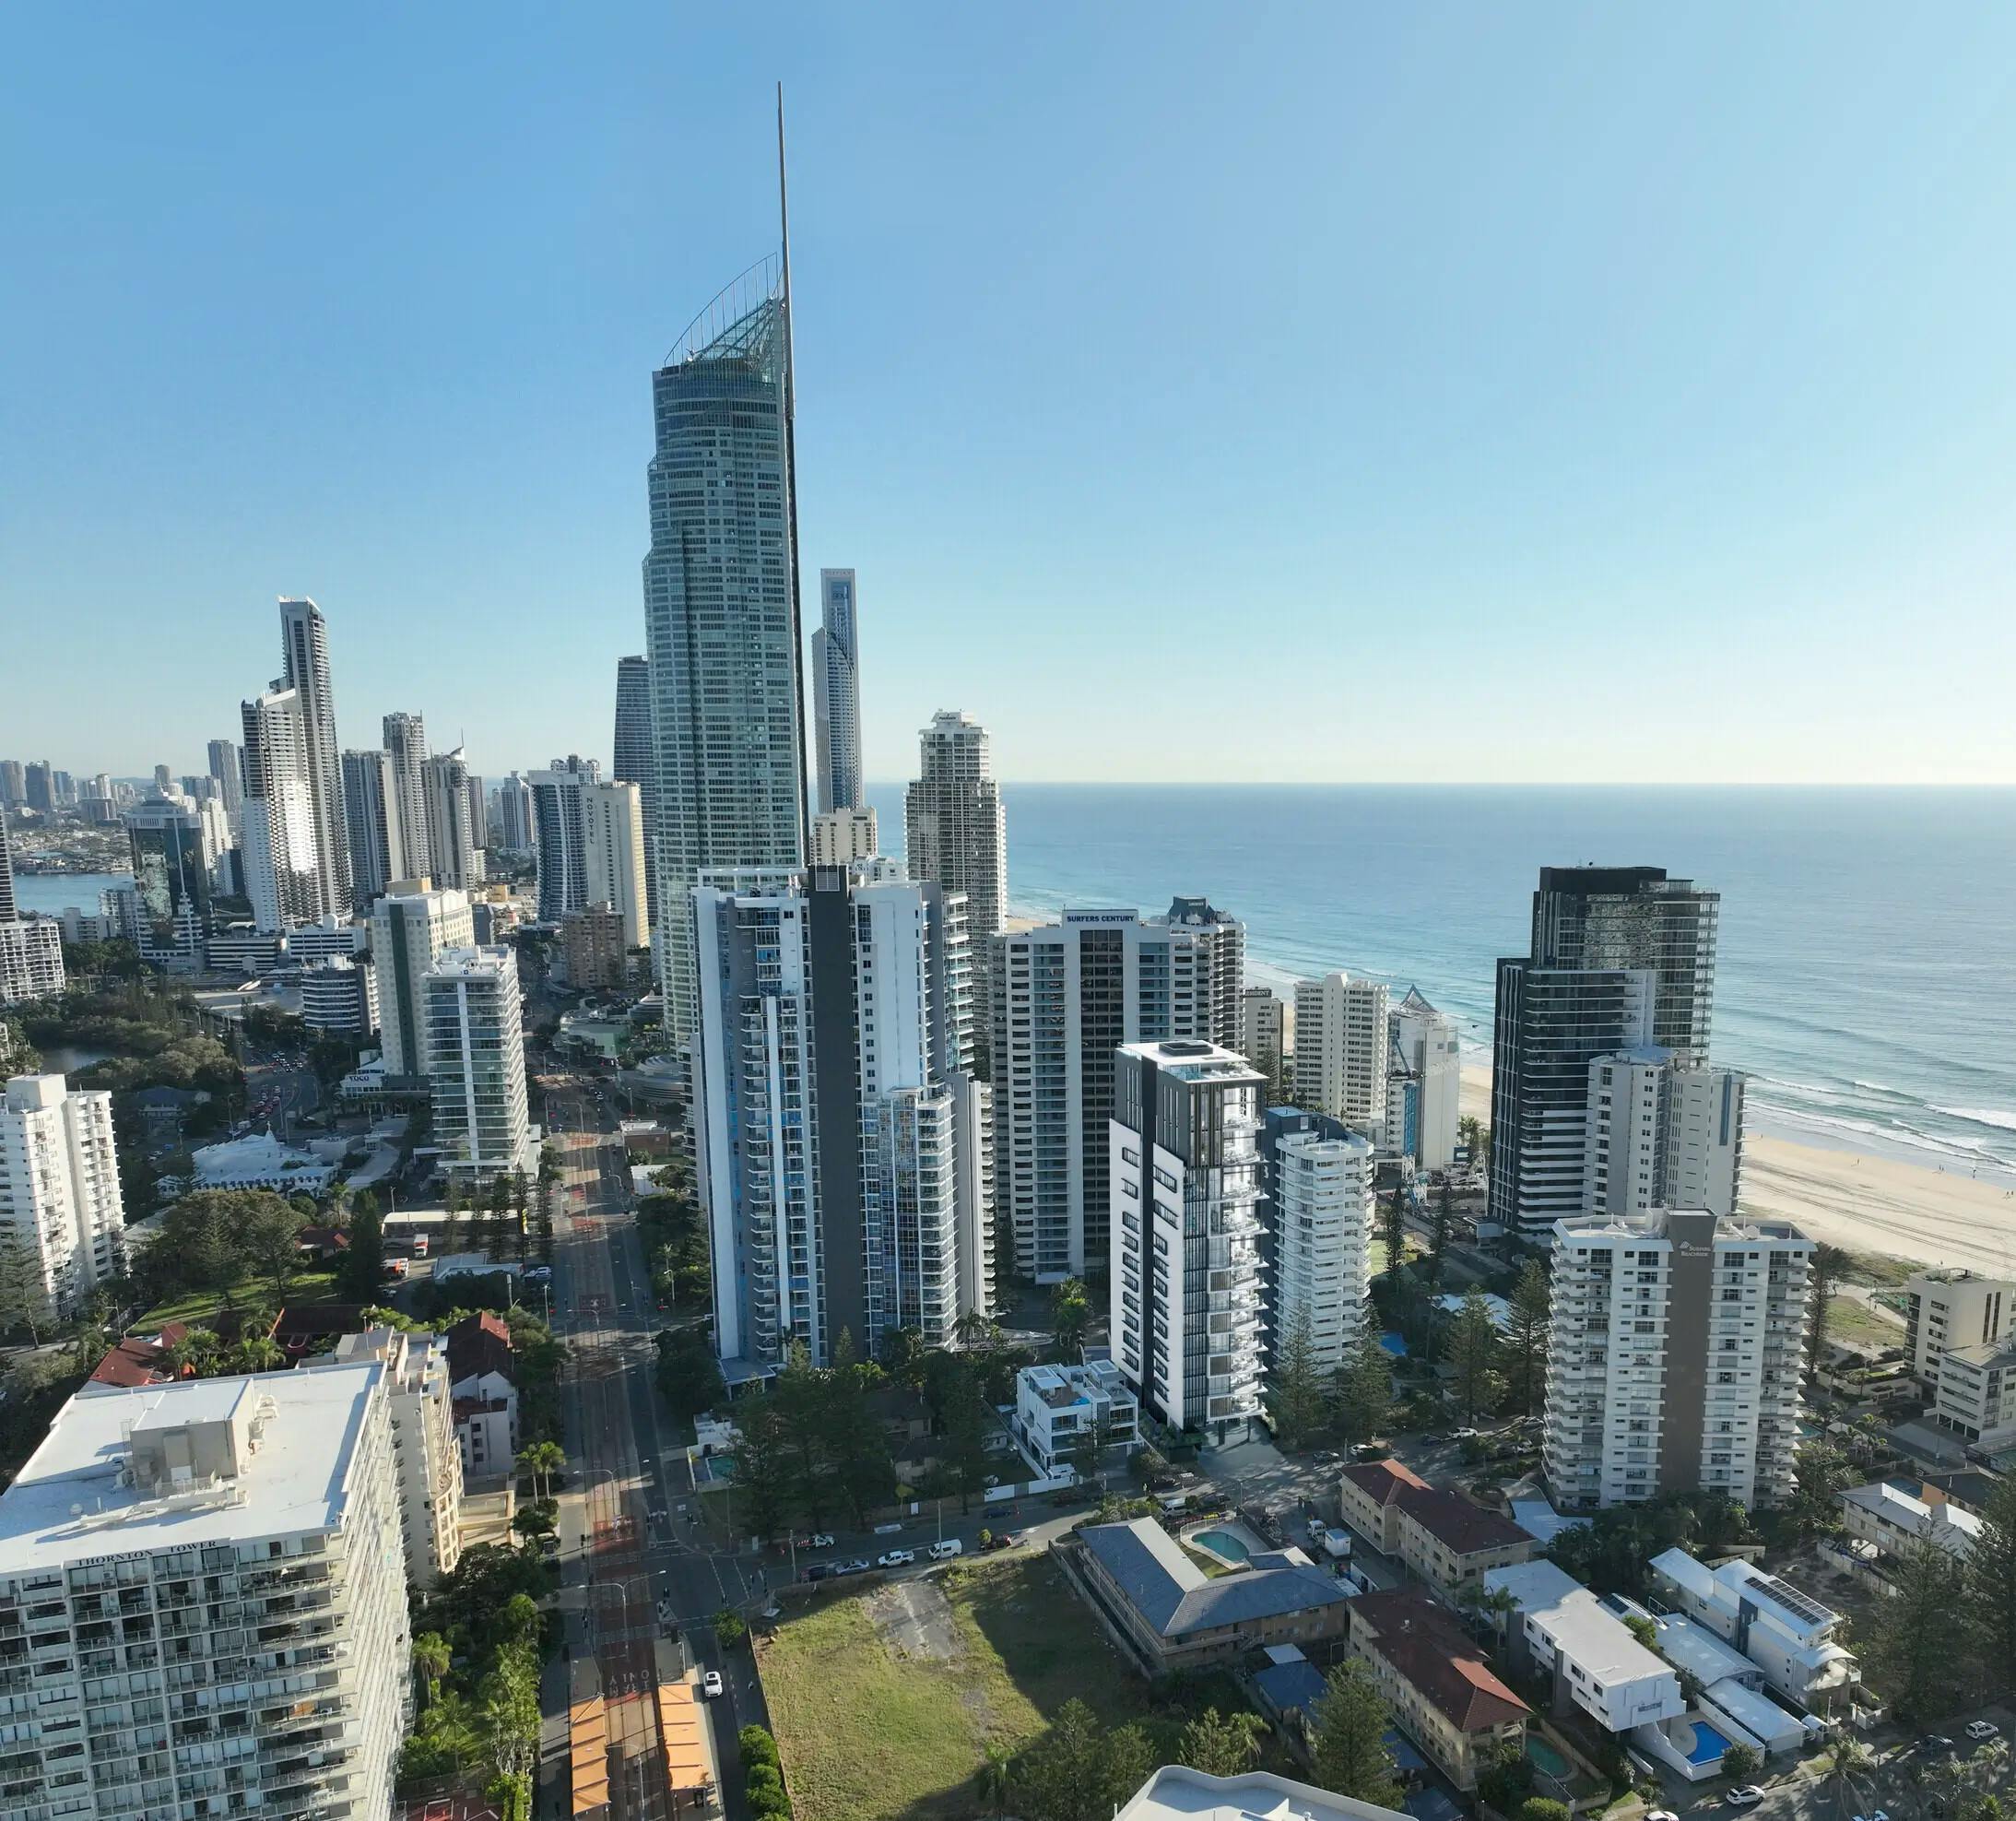 A panoramic view of a coastal city with tall skyscrapers and residential buildings. The cityscape extends along a sandy beach with the ocean in the background. The sky is clear, indicating a sunny day. Notable is a prominent, slender skyscraper on the left.